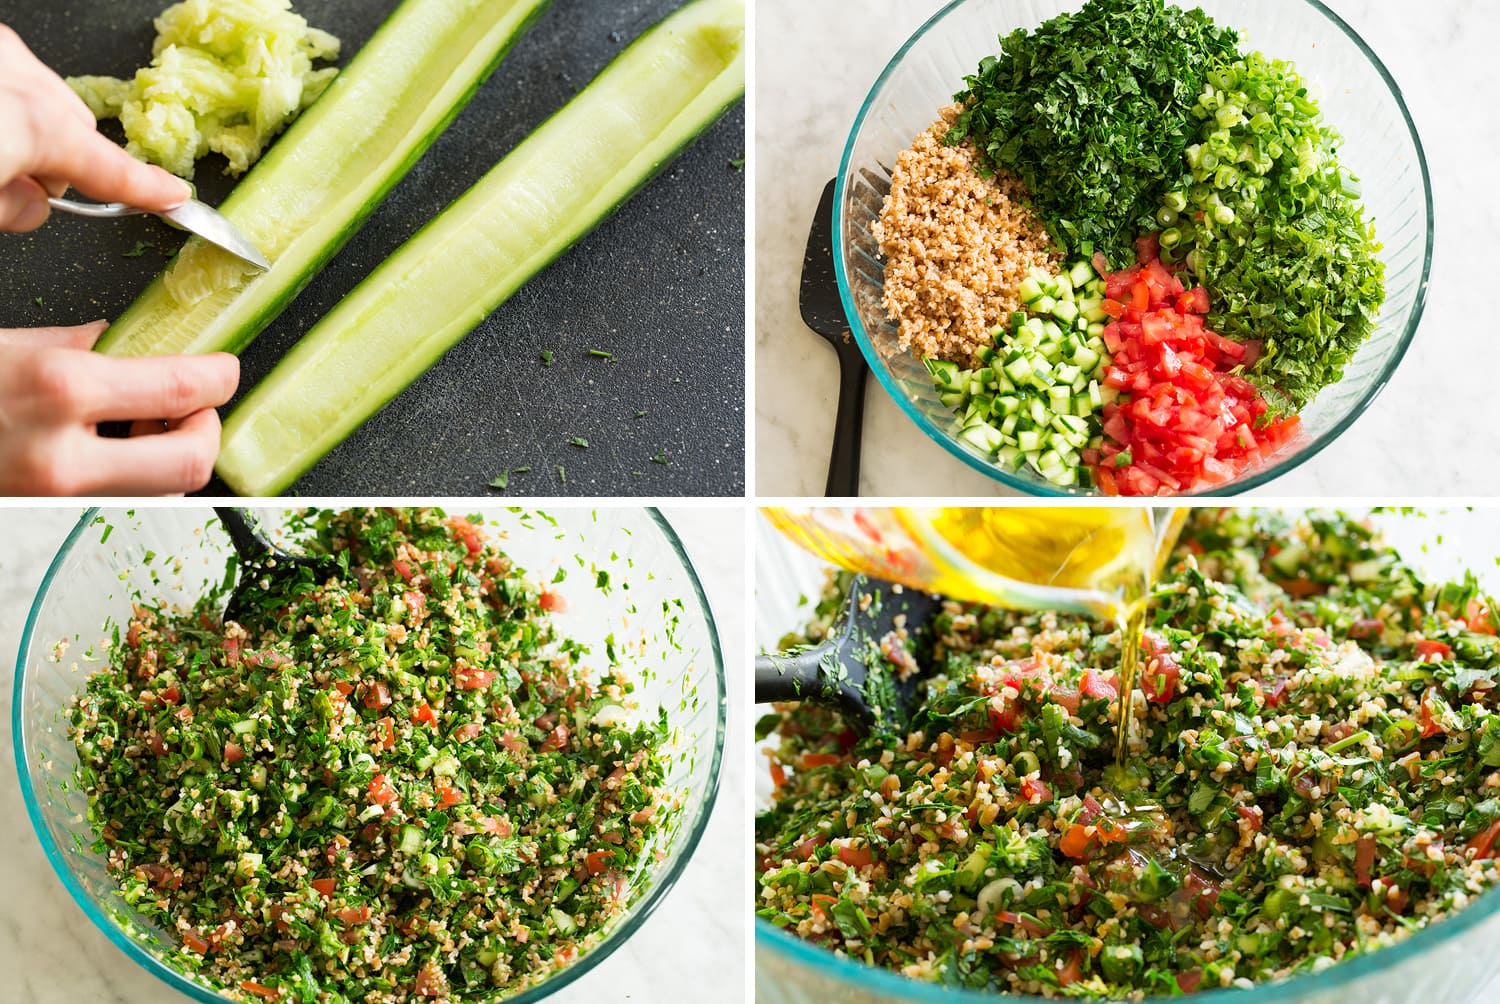 Continued steps to finish mixing tabbouleh.